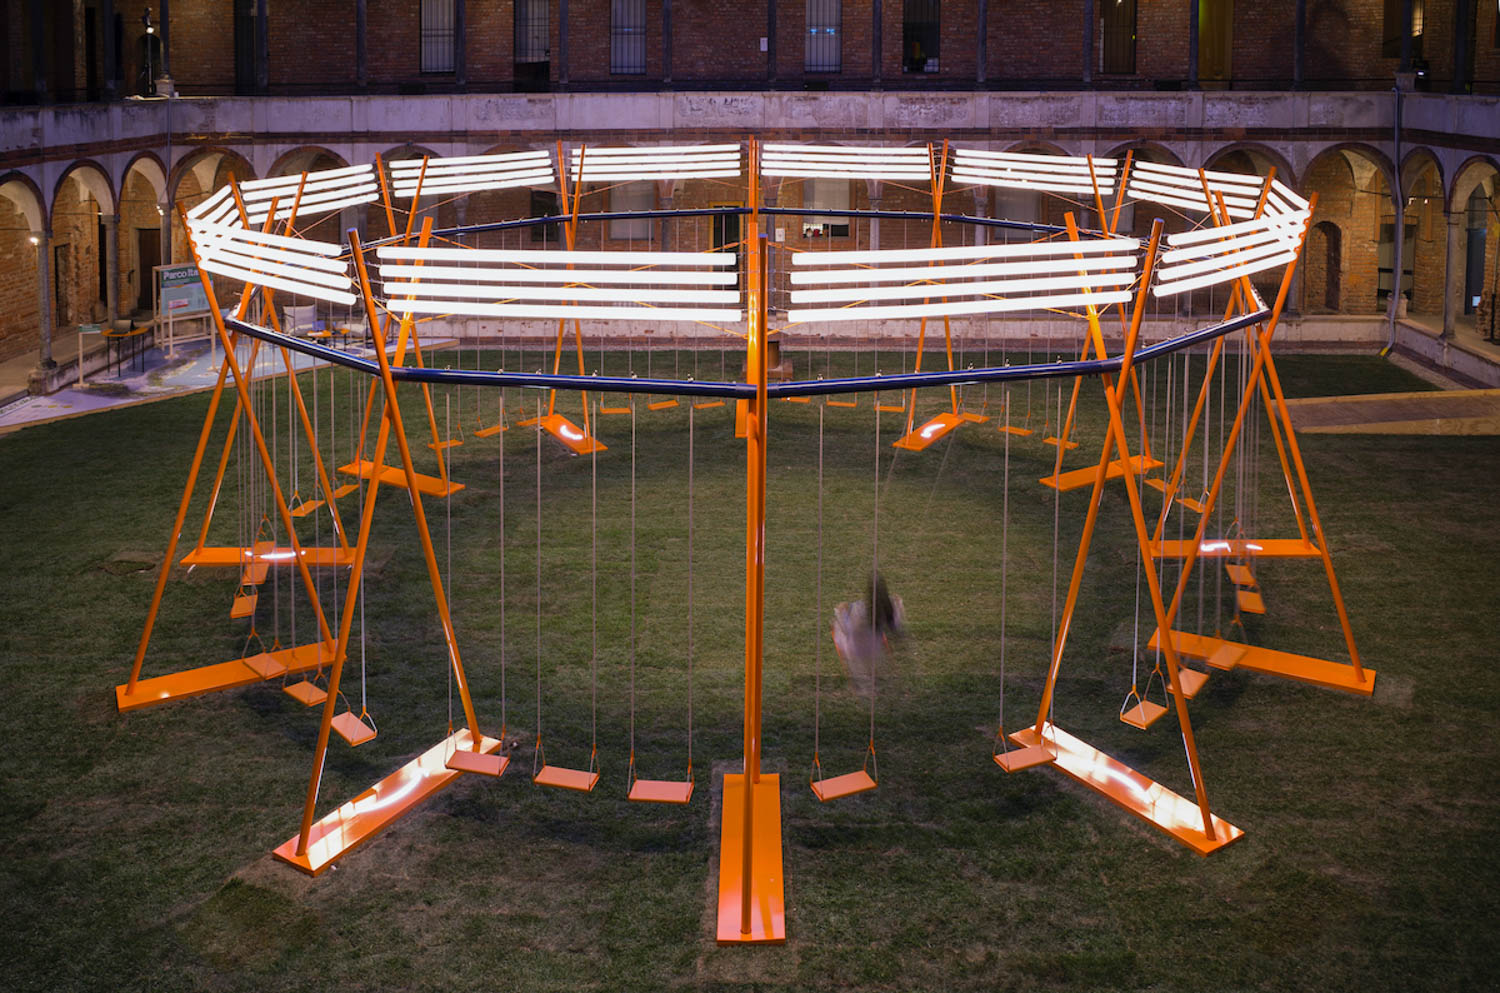 an oversized swing set with glowing lights